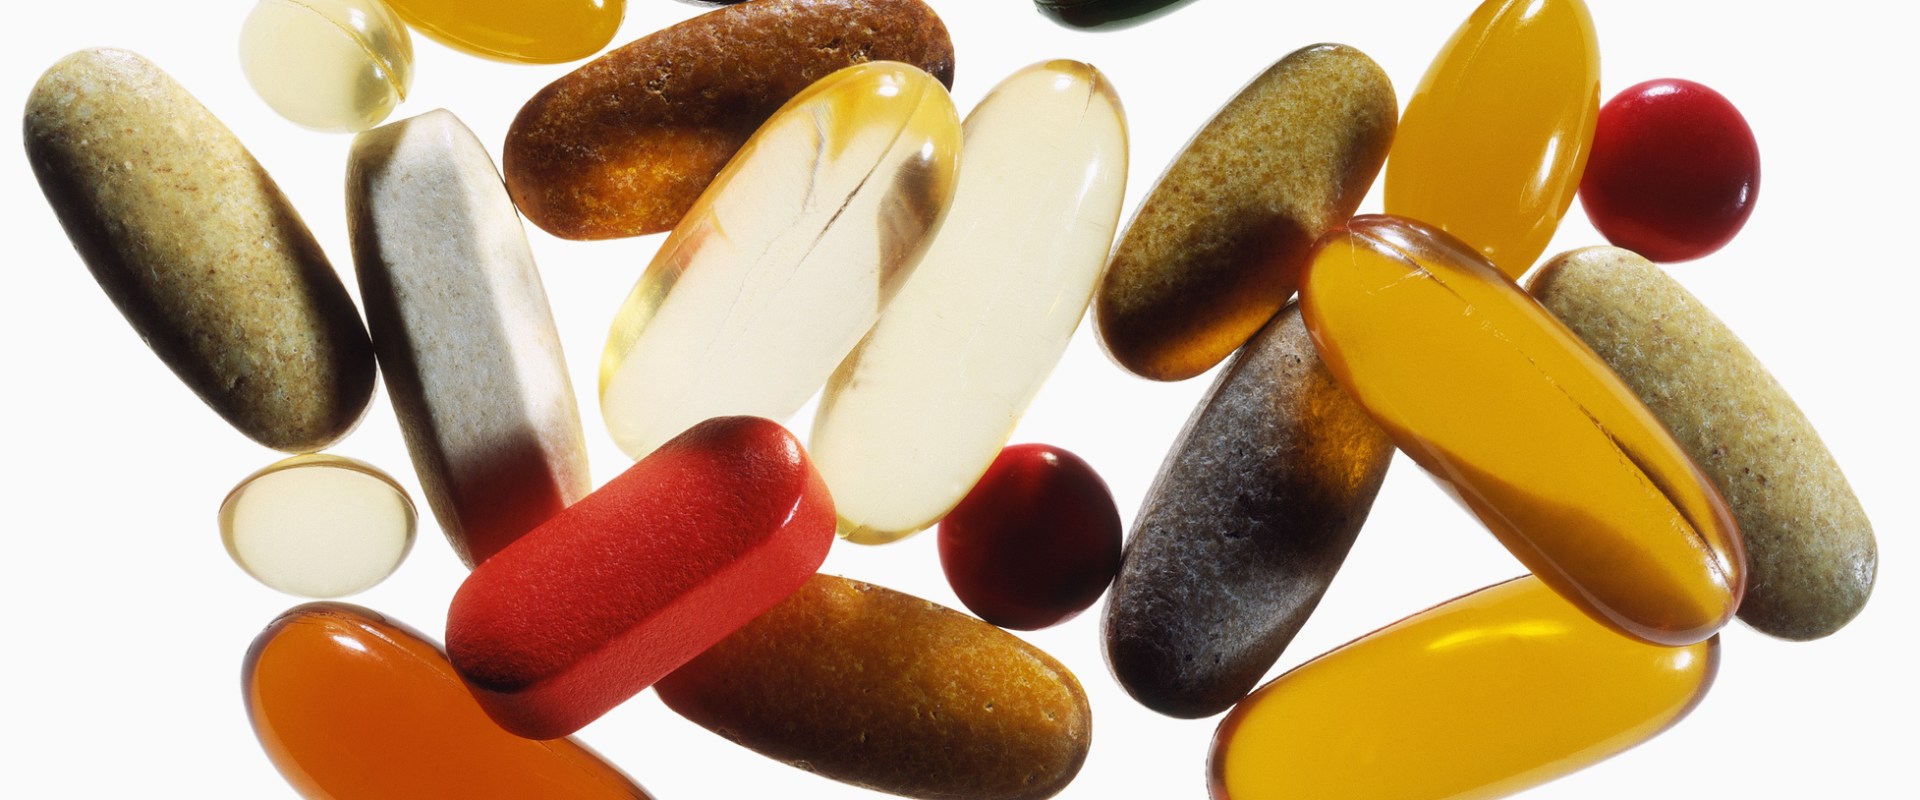 How to Ensure Quality When Taking Health Supplements